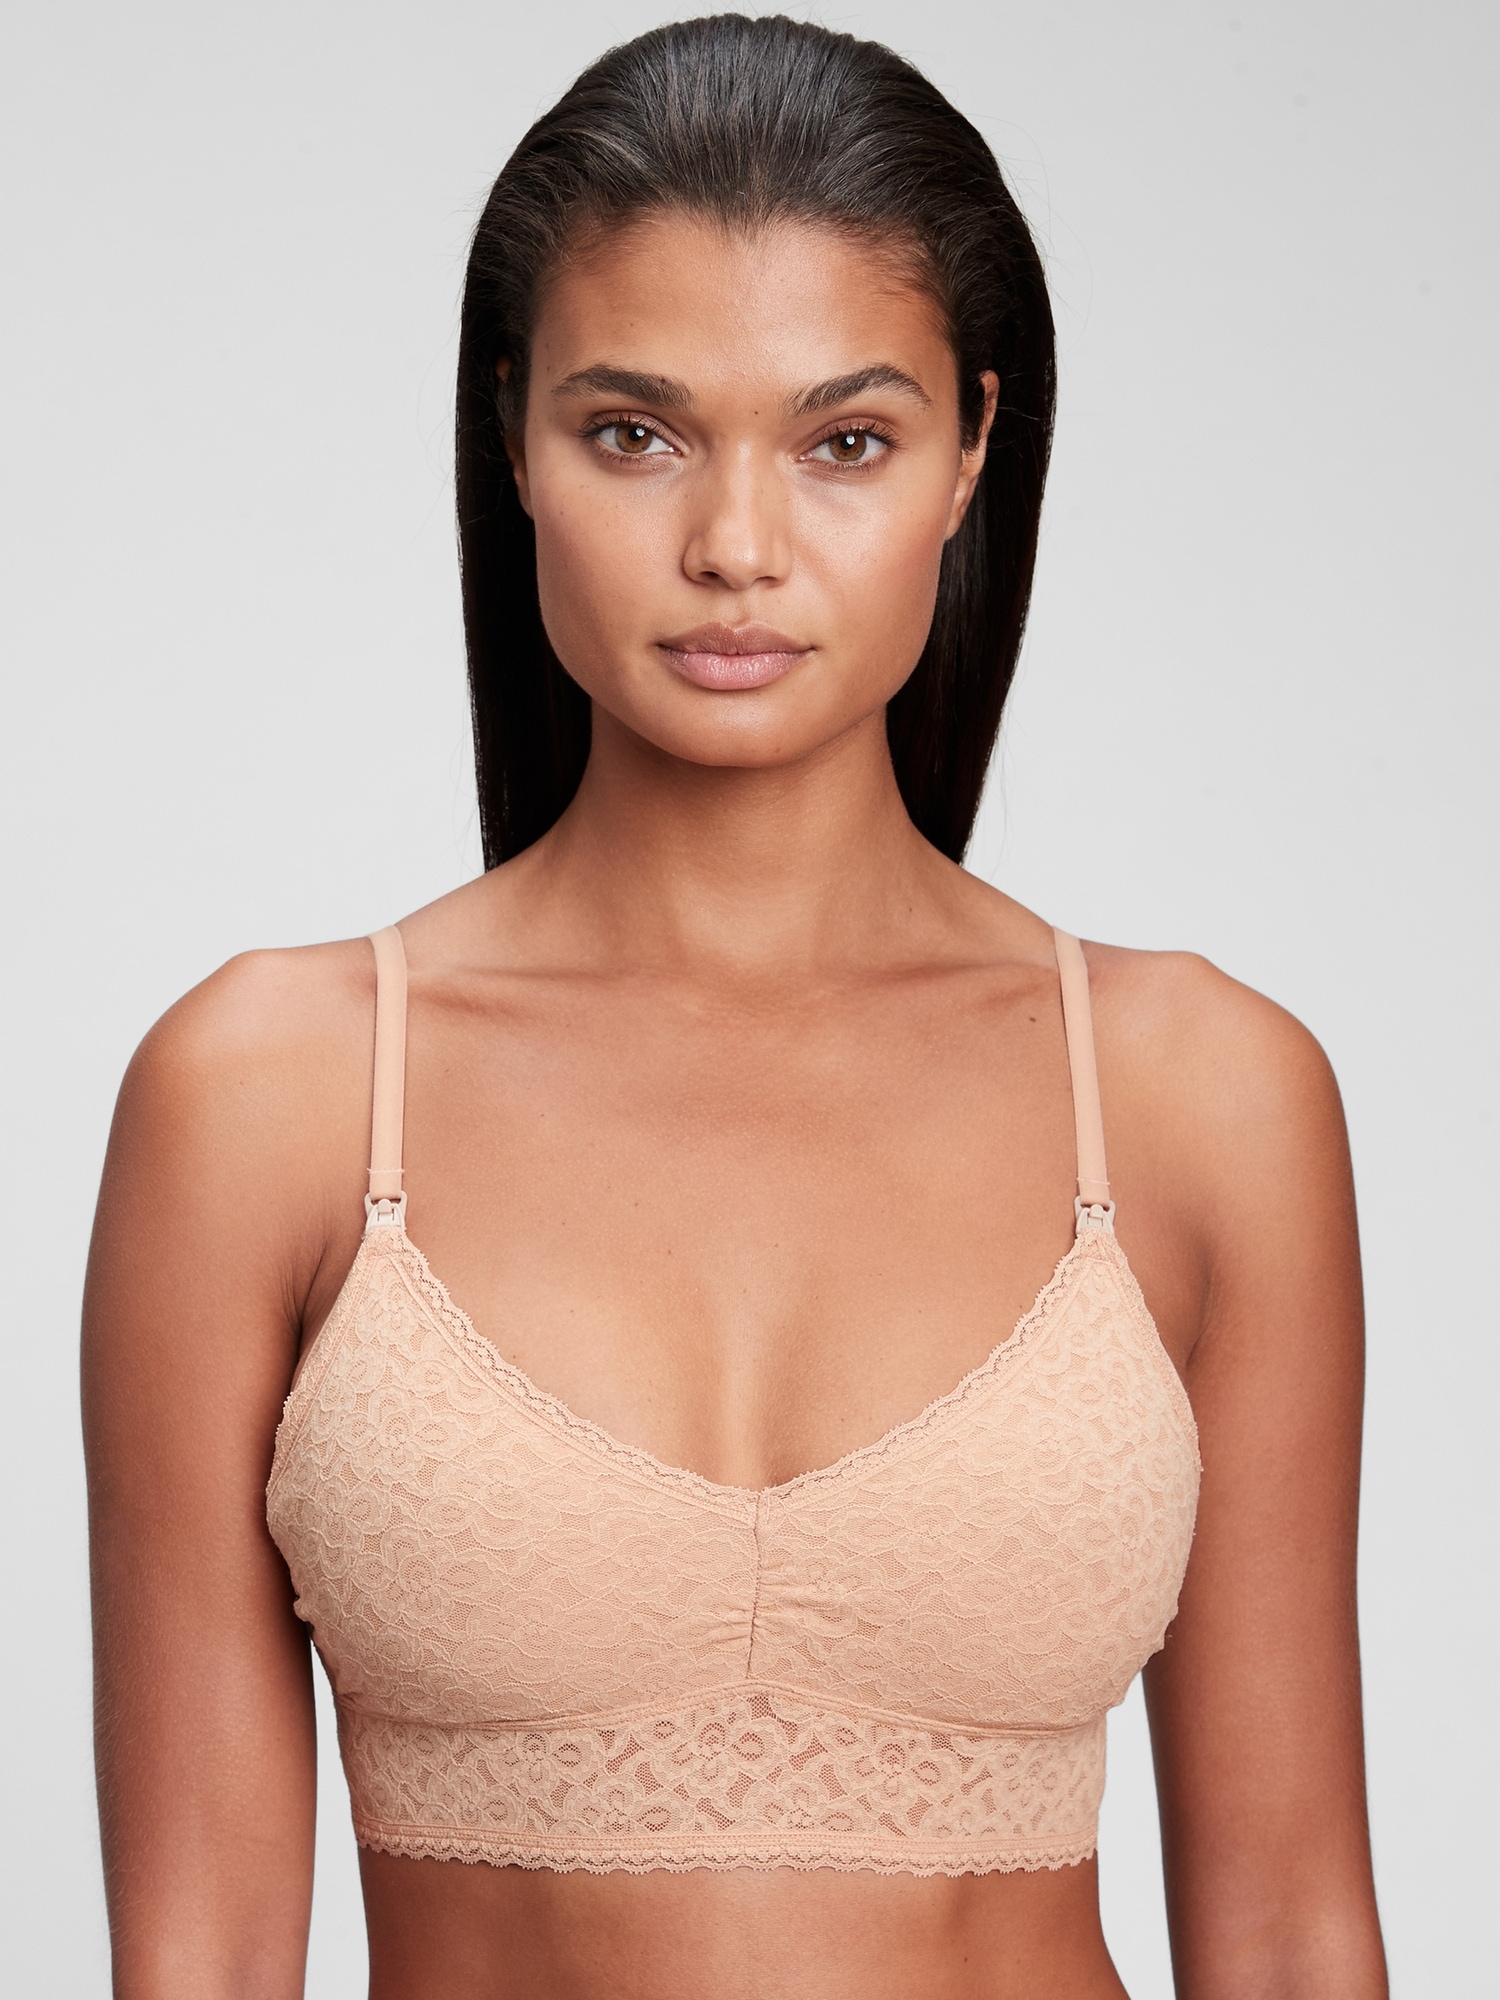 Buy Gap Gym Cami Bra Top from the Gap online shop